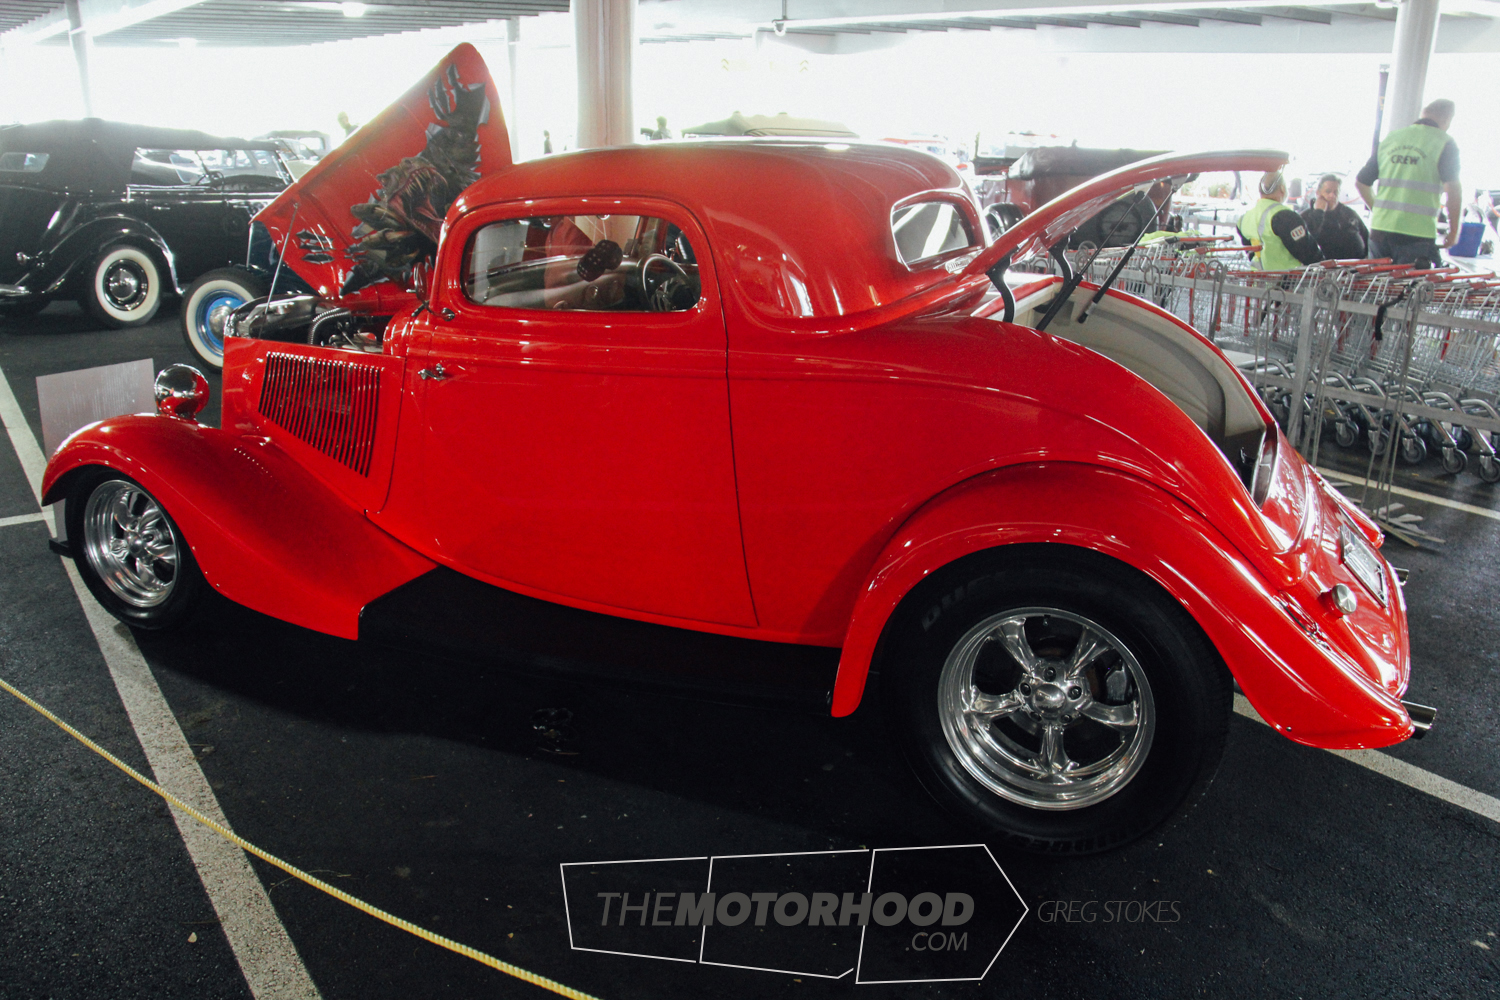    Shane and Lynda Tate’s ’33 Ford Coupe is a recent build by D&amp;V Autos featuring an injected Ford engine   